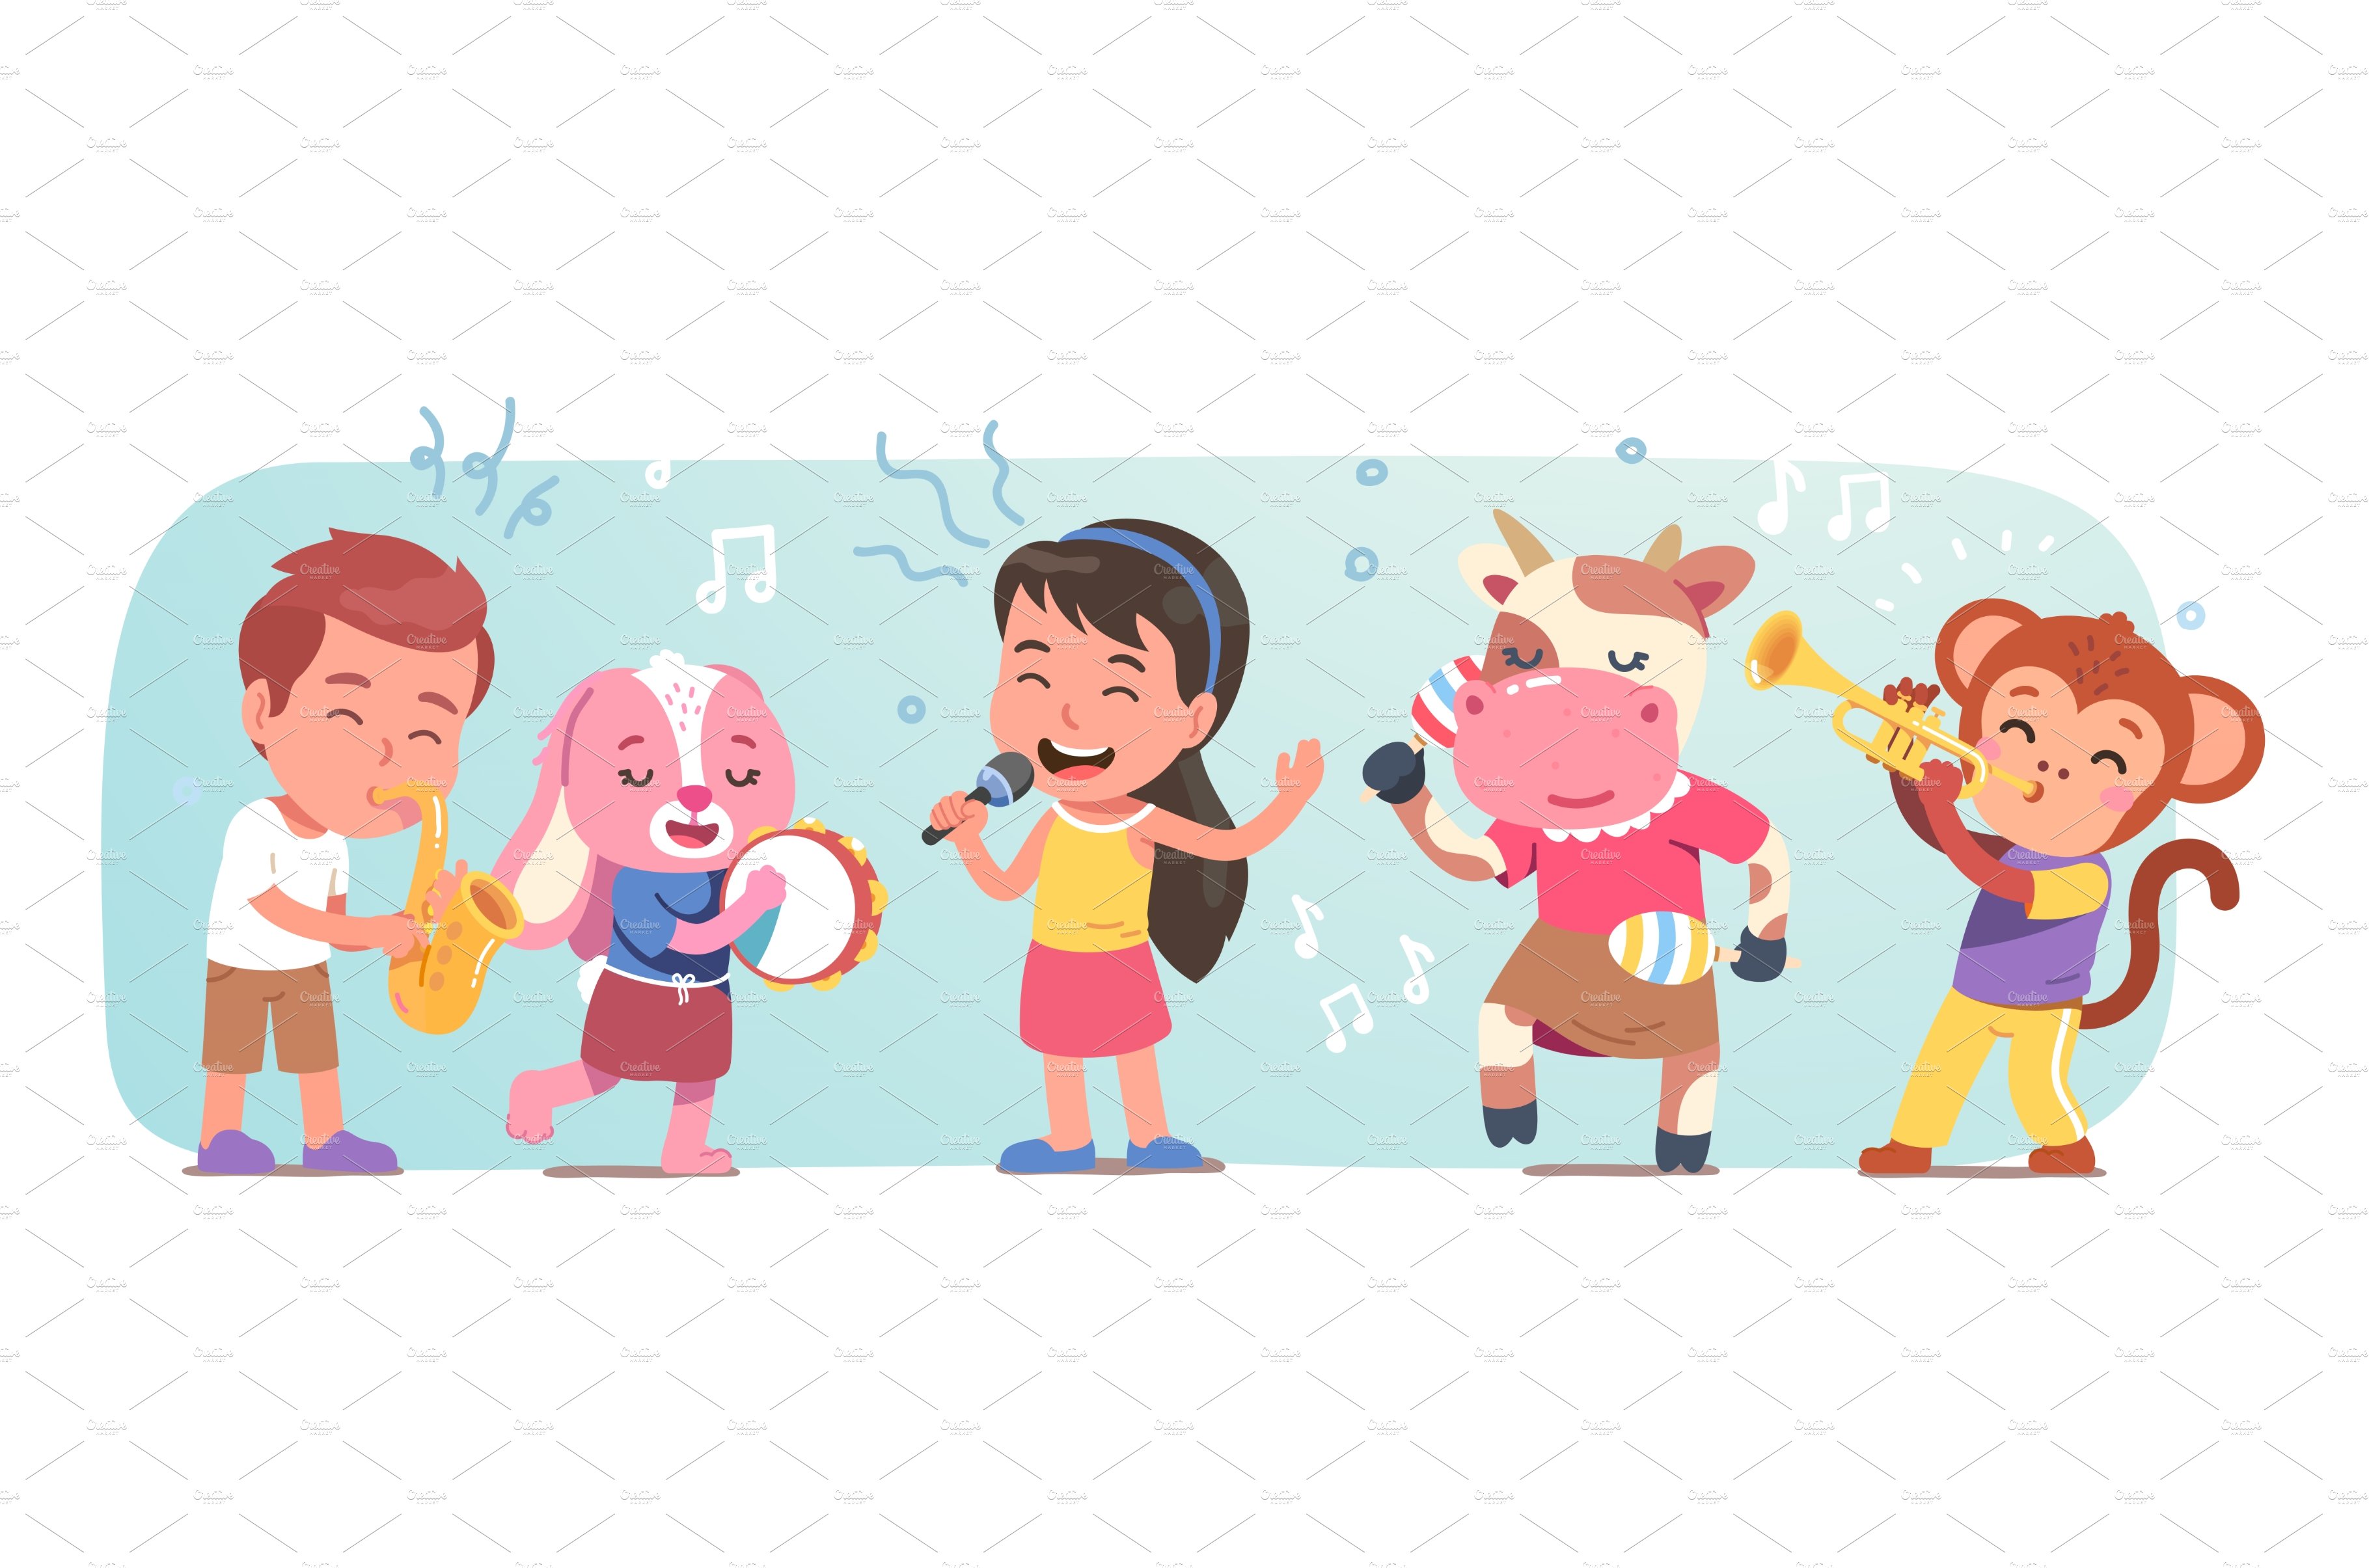 Kids and animals music band singing cover image.